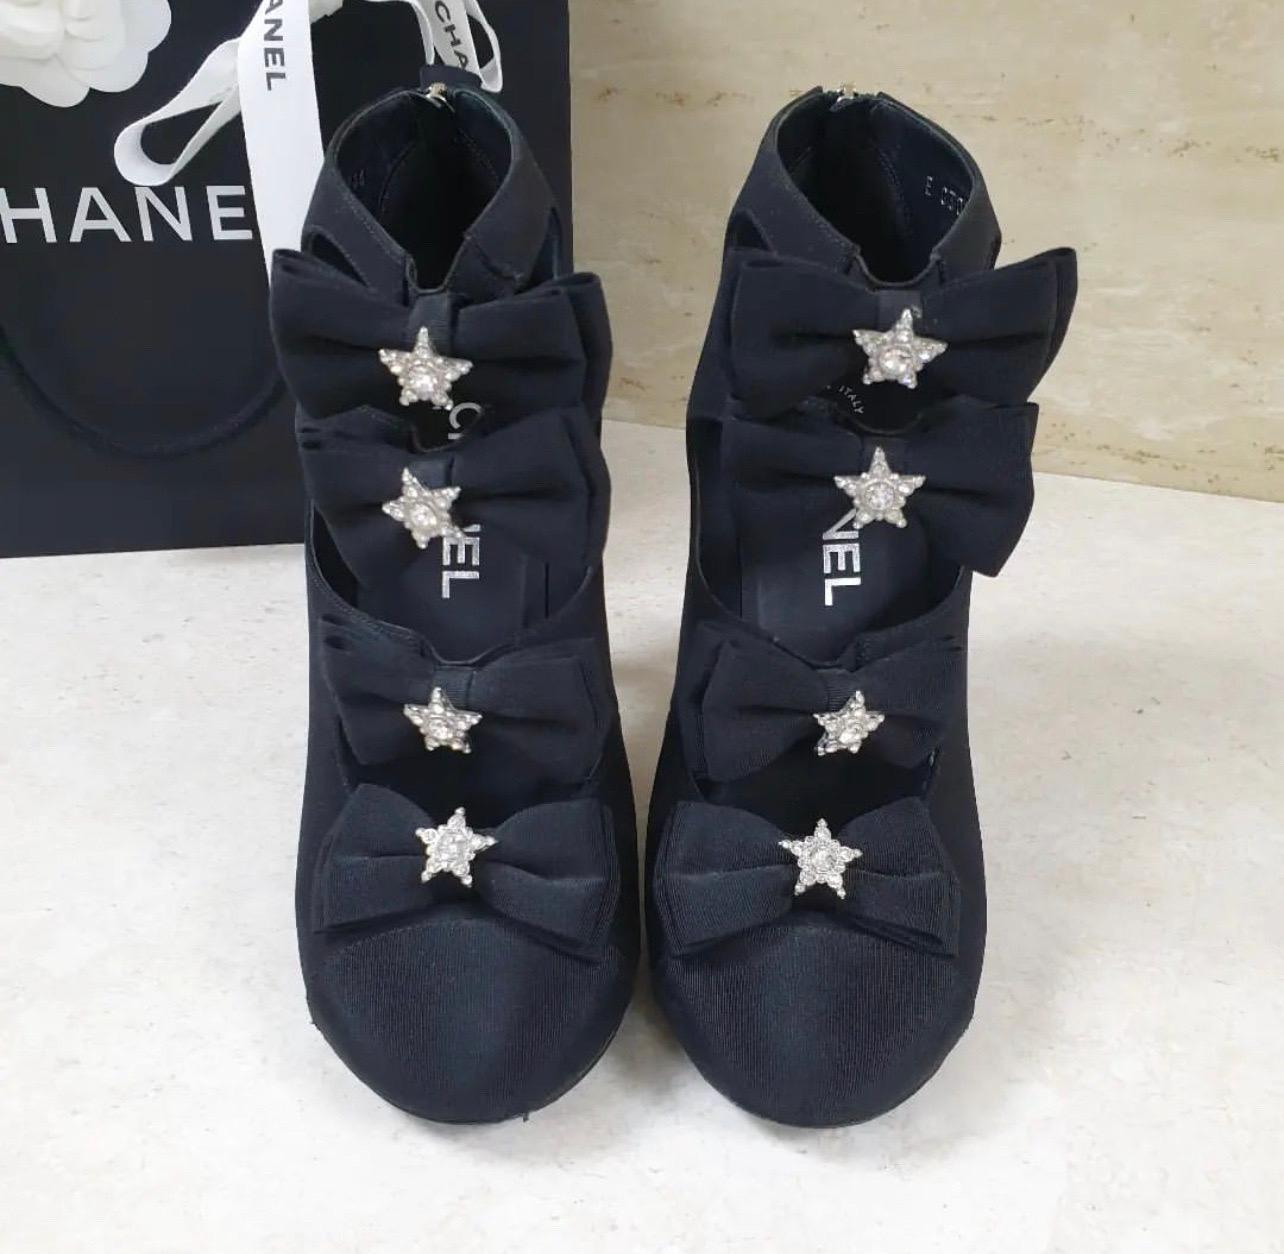 Chanel Textile Open  Booties

CHANEL 2015 15A Collection

Very good condition. Minor signs of wear seen on pics.

No original packaging.